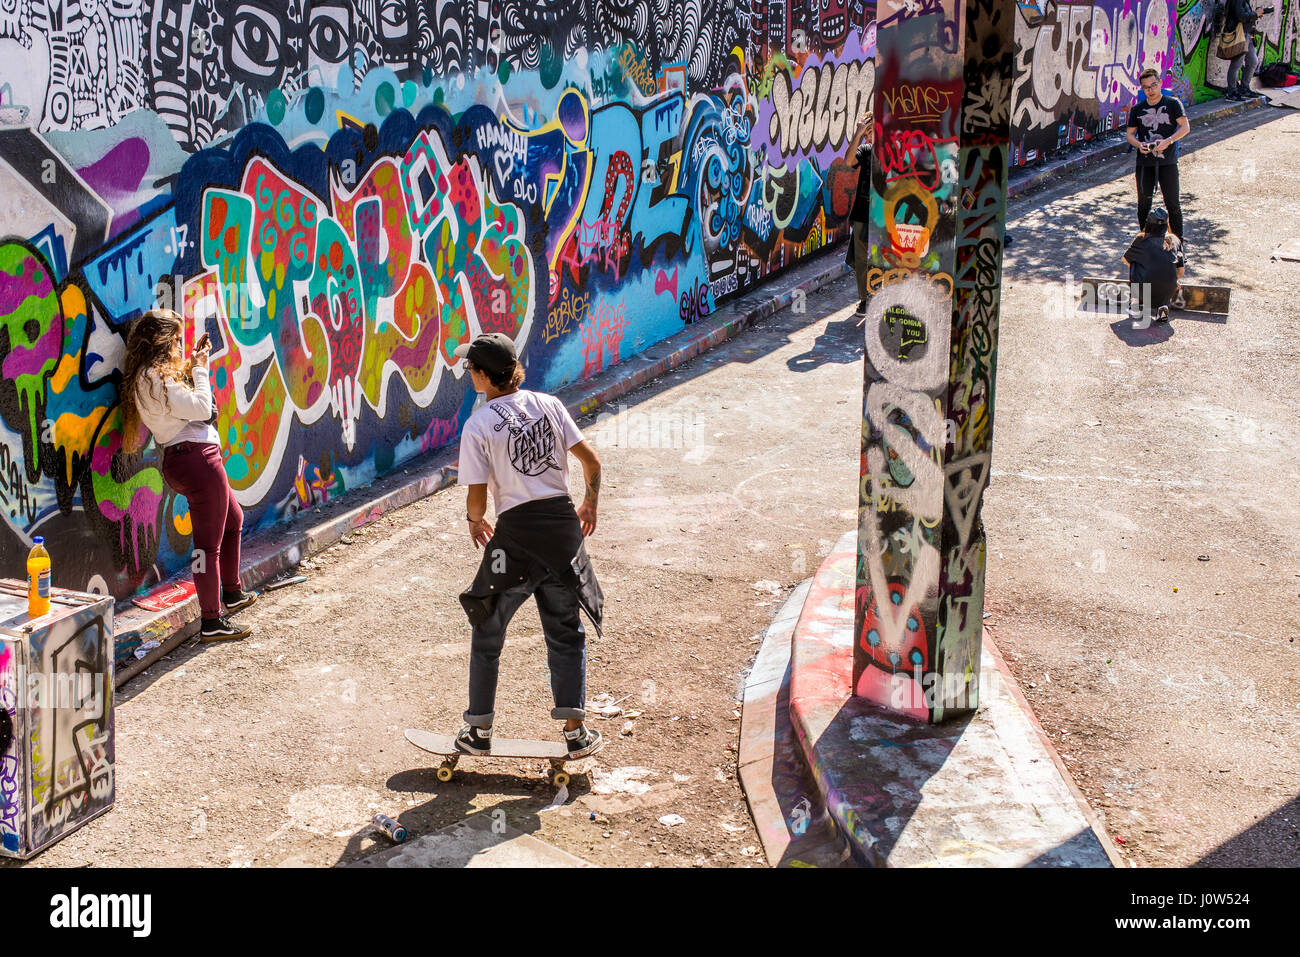 Teenager skater riding a skateboard in Leake Street tunnel, London, UK. Leake street also known as 'Graffiti Tunnel' or the 'Banksy Tunnel' is a road  Stock Photo